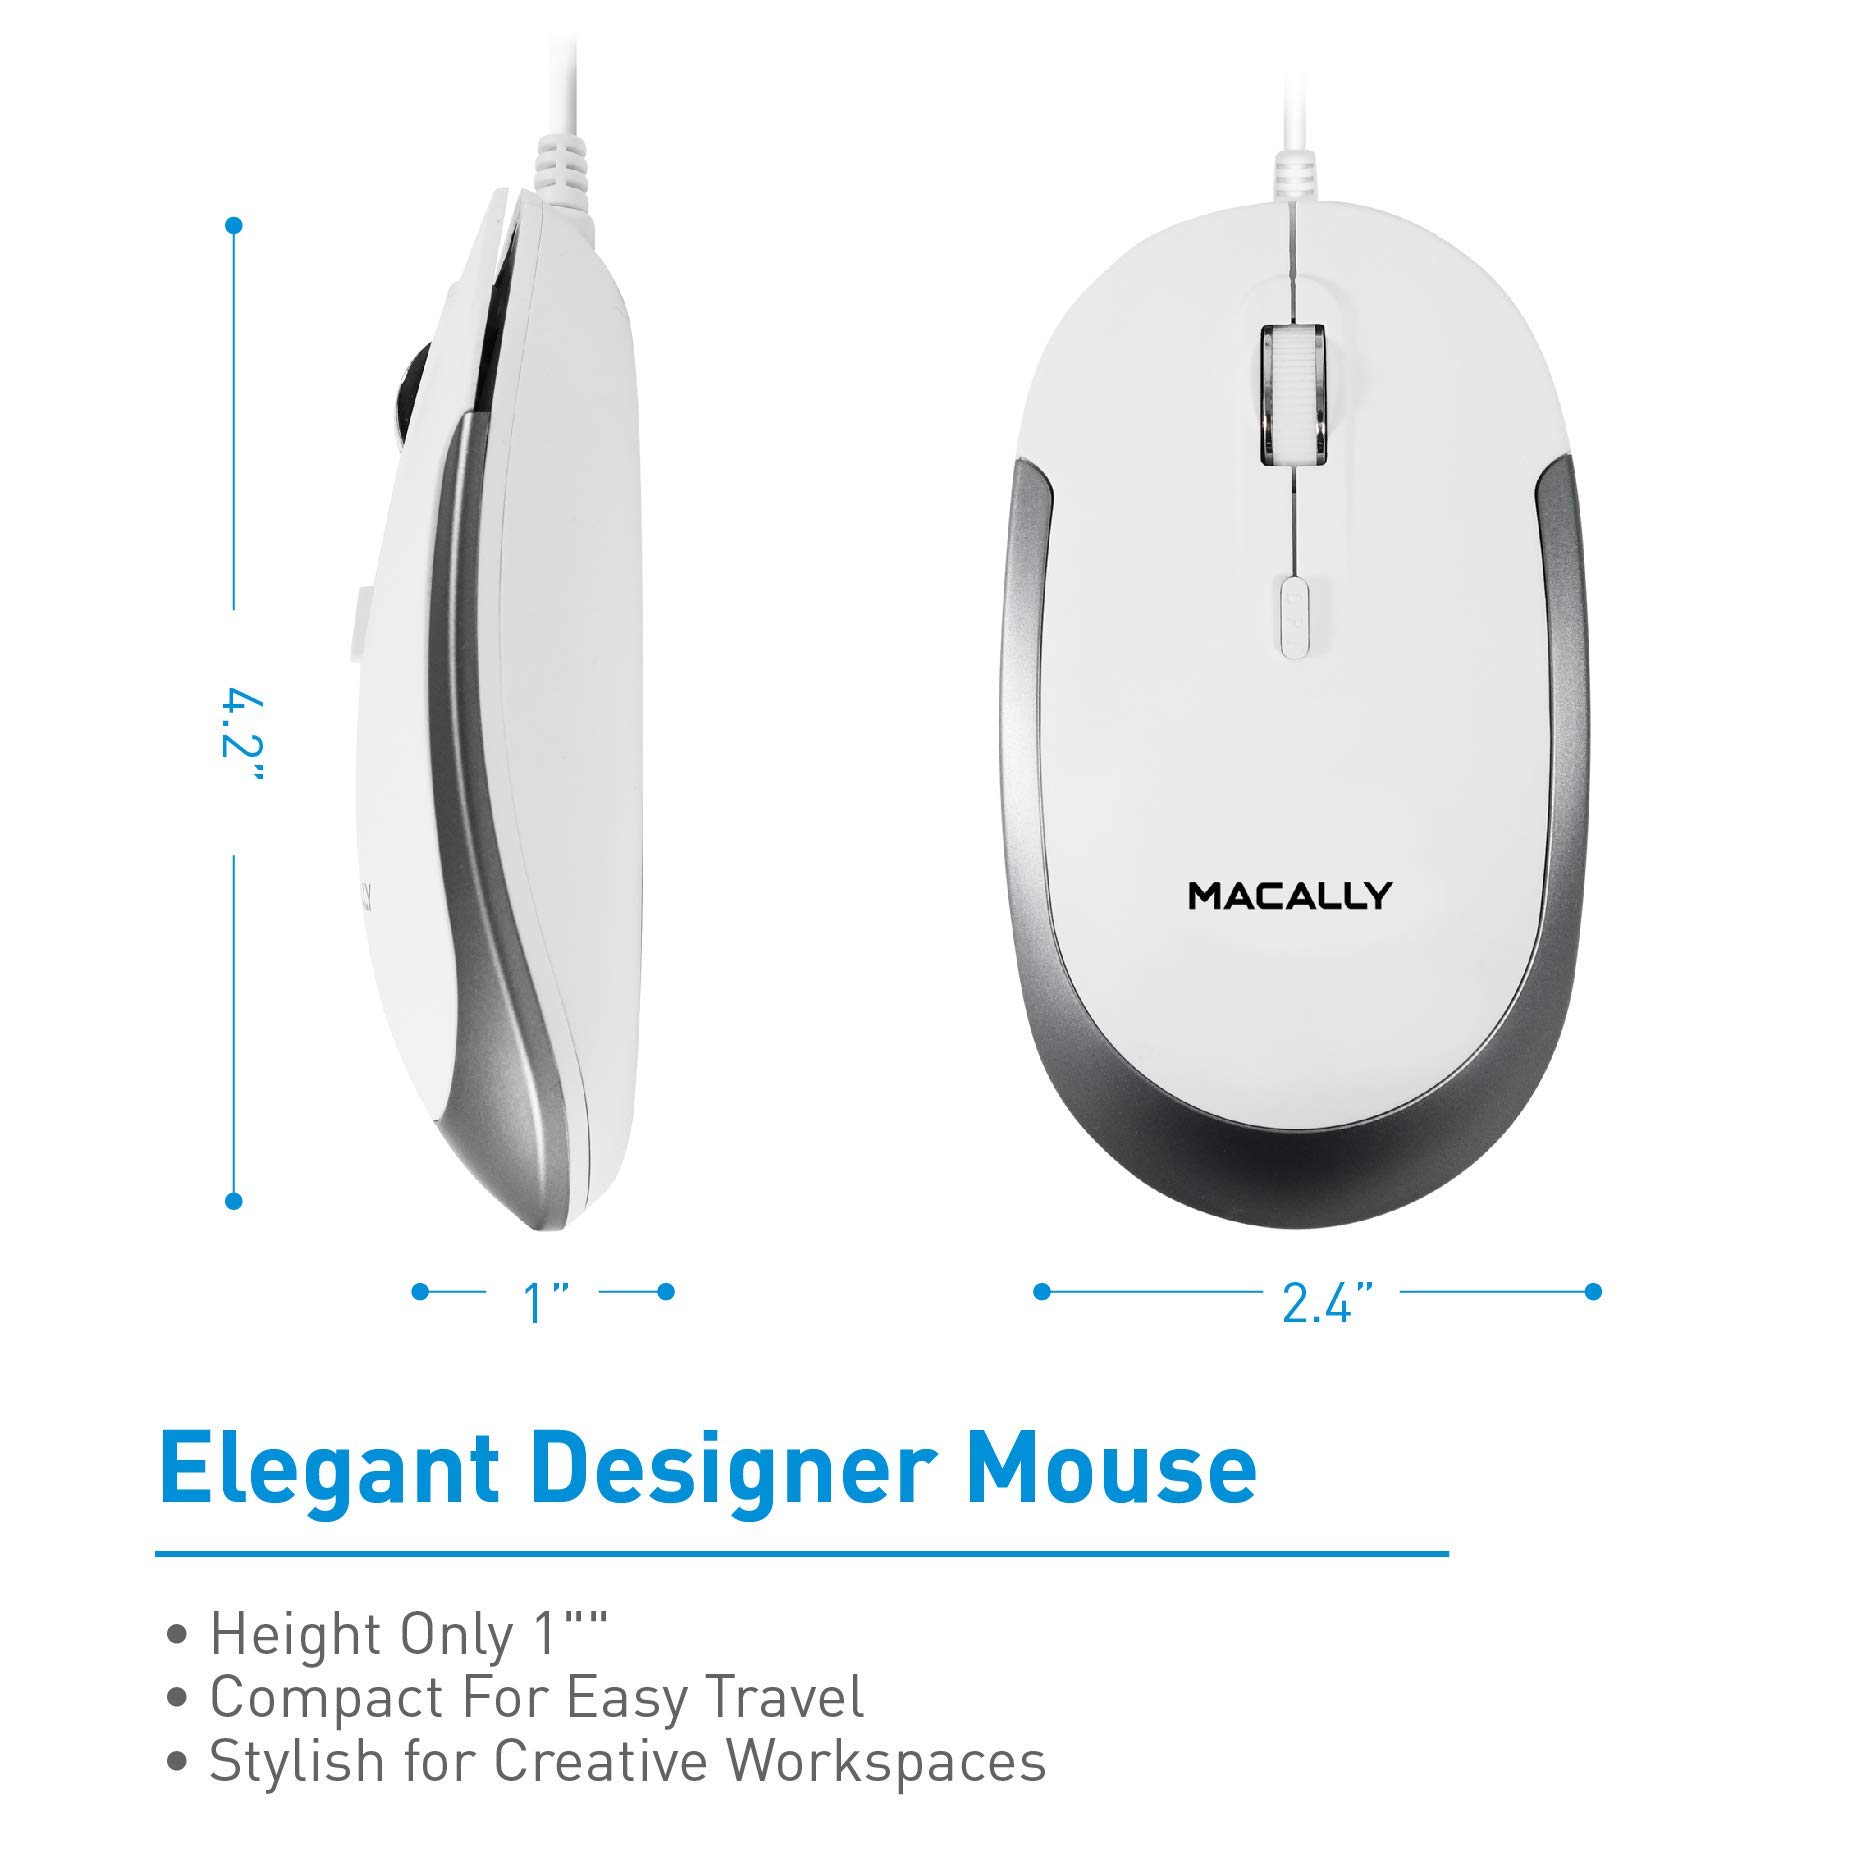 Macally Mini Wired Keyboard and a Quiet Wired Mouse, Office Essentials